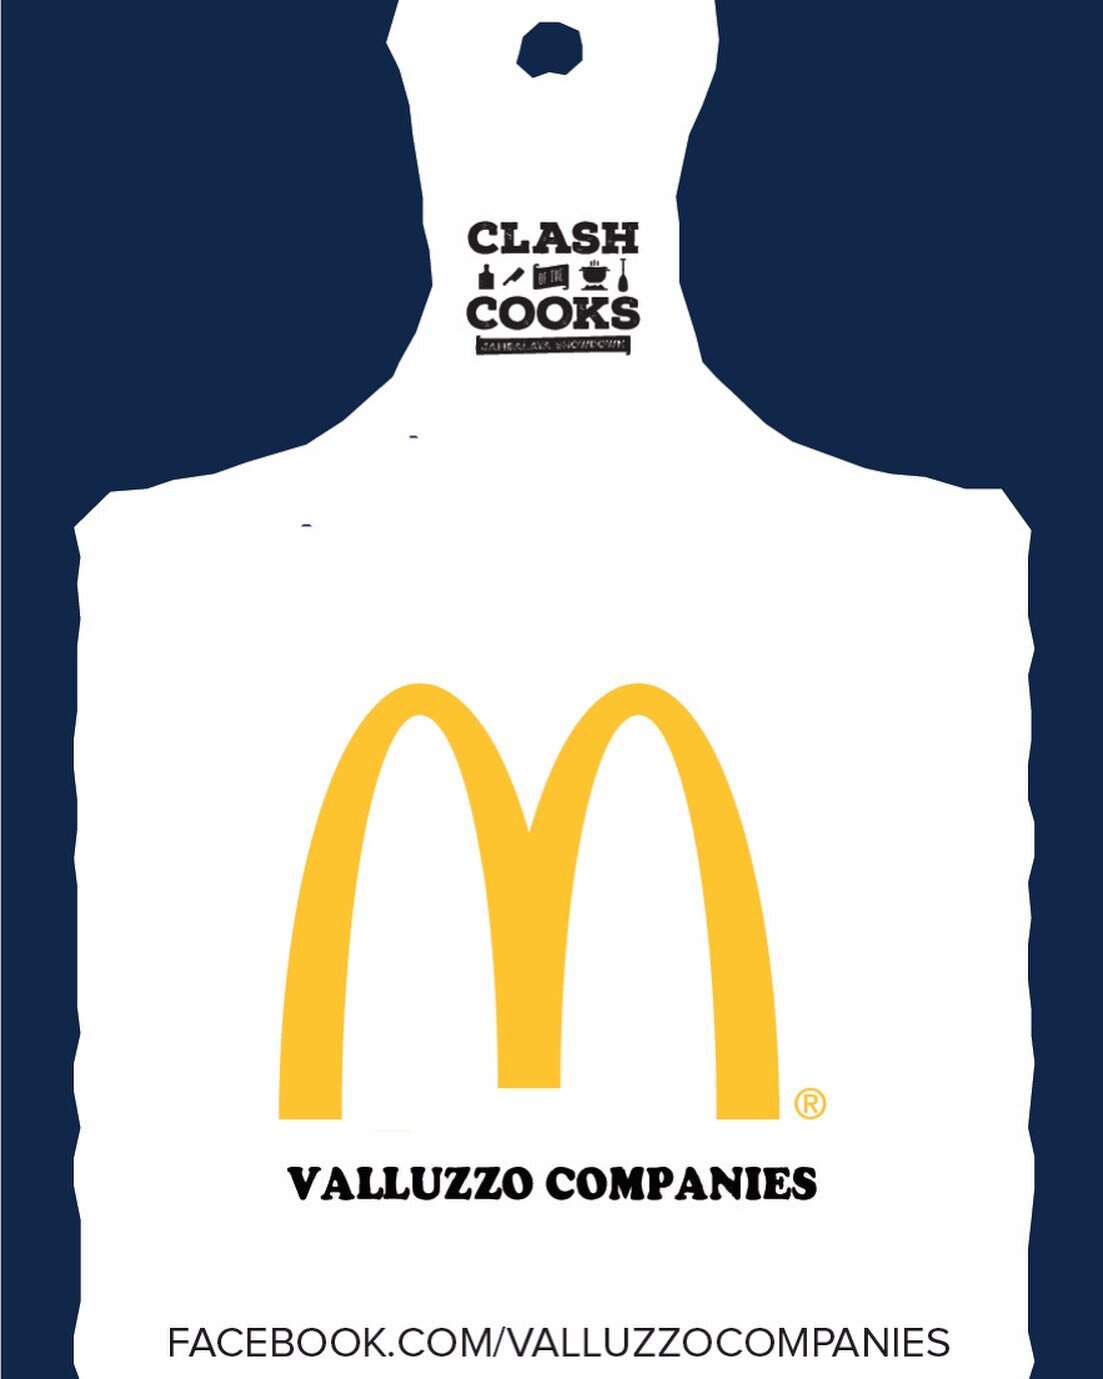 &ldquo;Lagniappe&rdquo; means a little bit extra but in this instance it means a whole lotta bit extra.  Thank you to @valluzzocompanies for helping us in more ways than we can count.  We are so greatful for their continued support of #clashofthecook